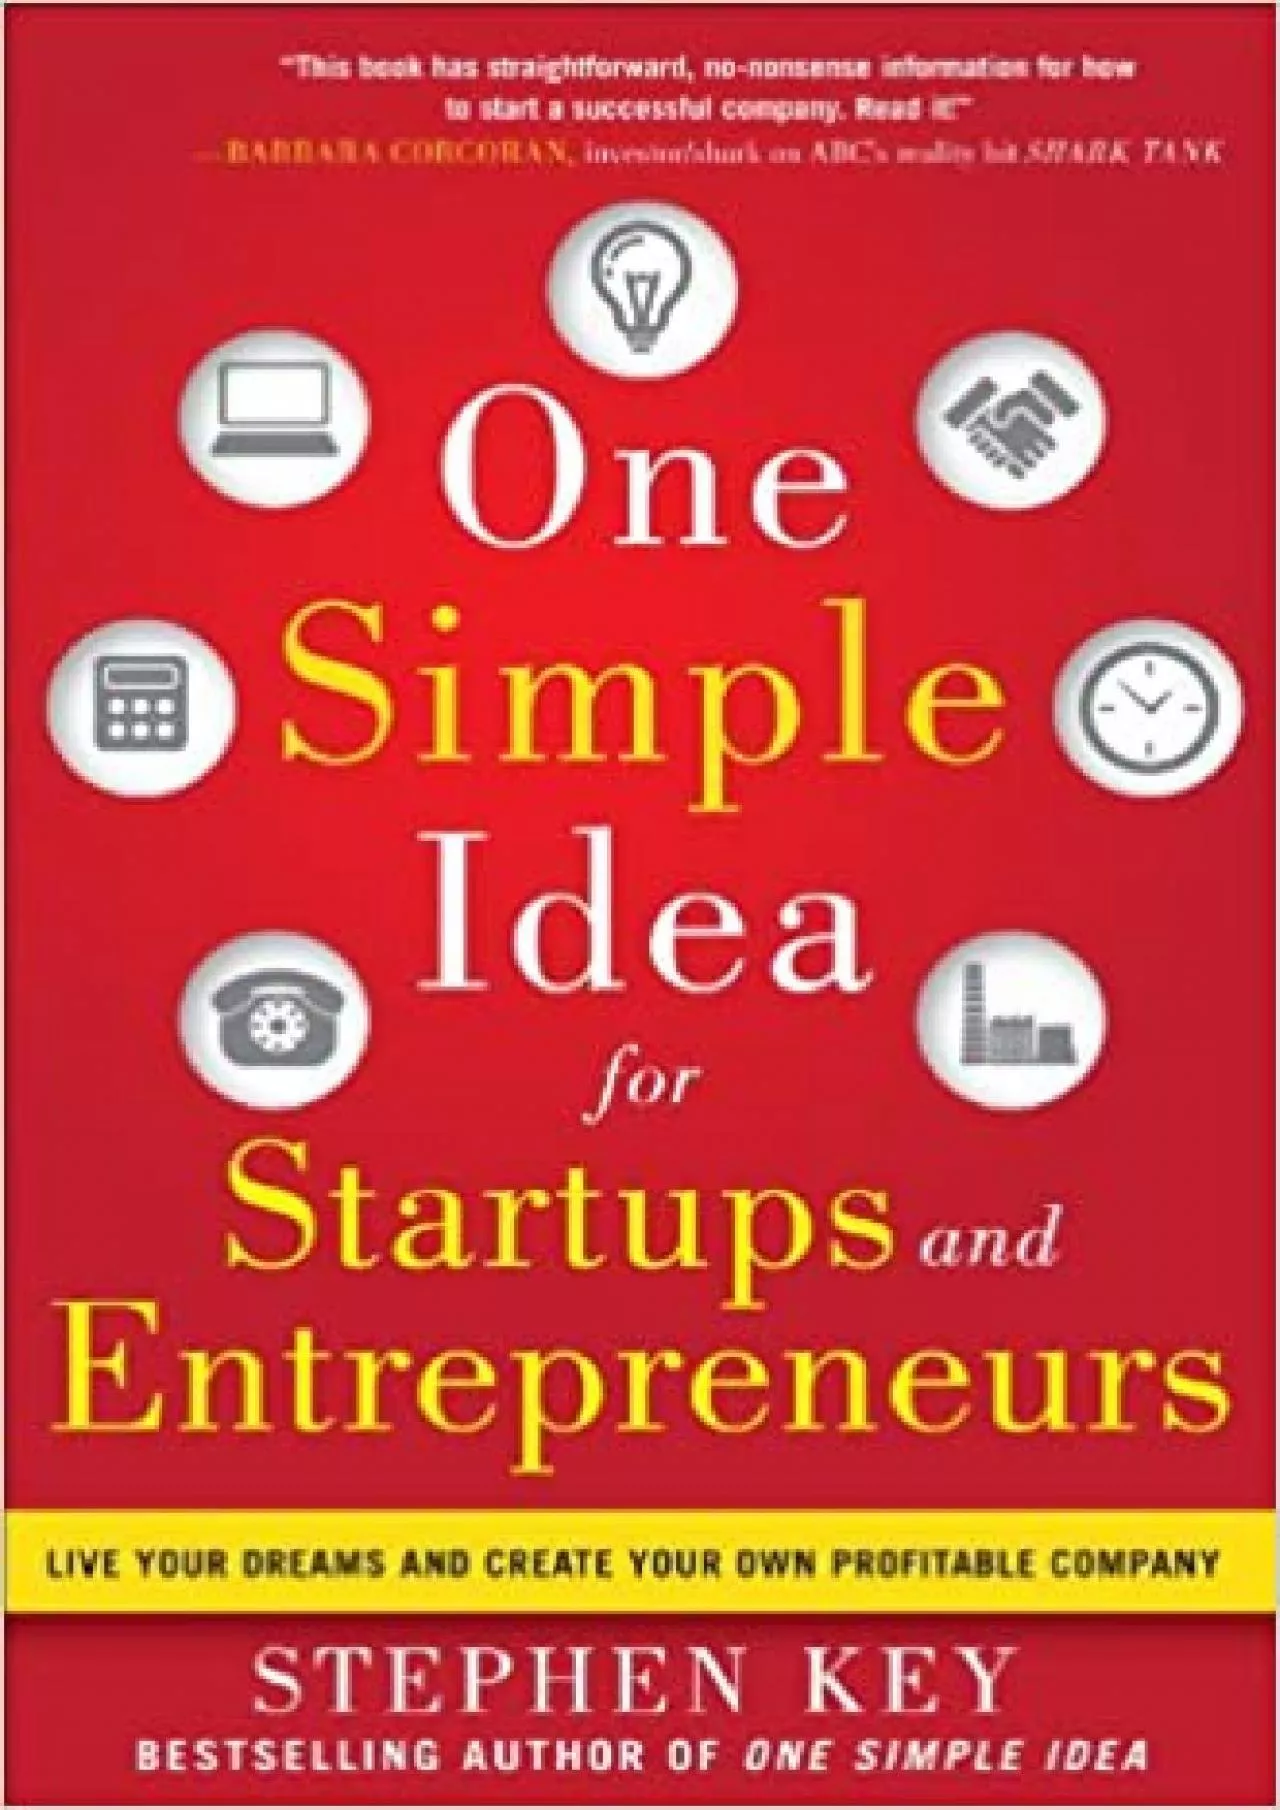 One Simple Idea for Startups and Entrepreneurs Live Your Dreams and Create Your Own Profitable